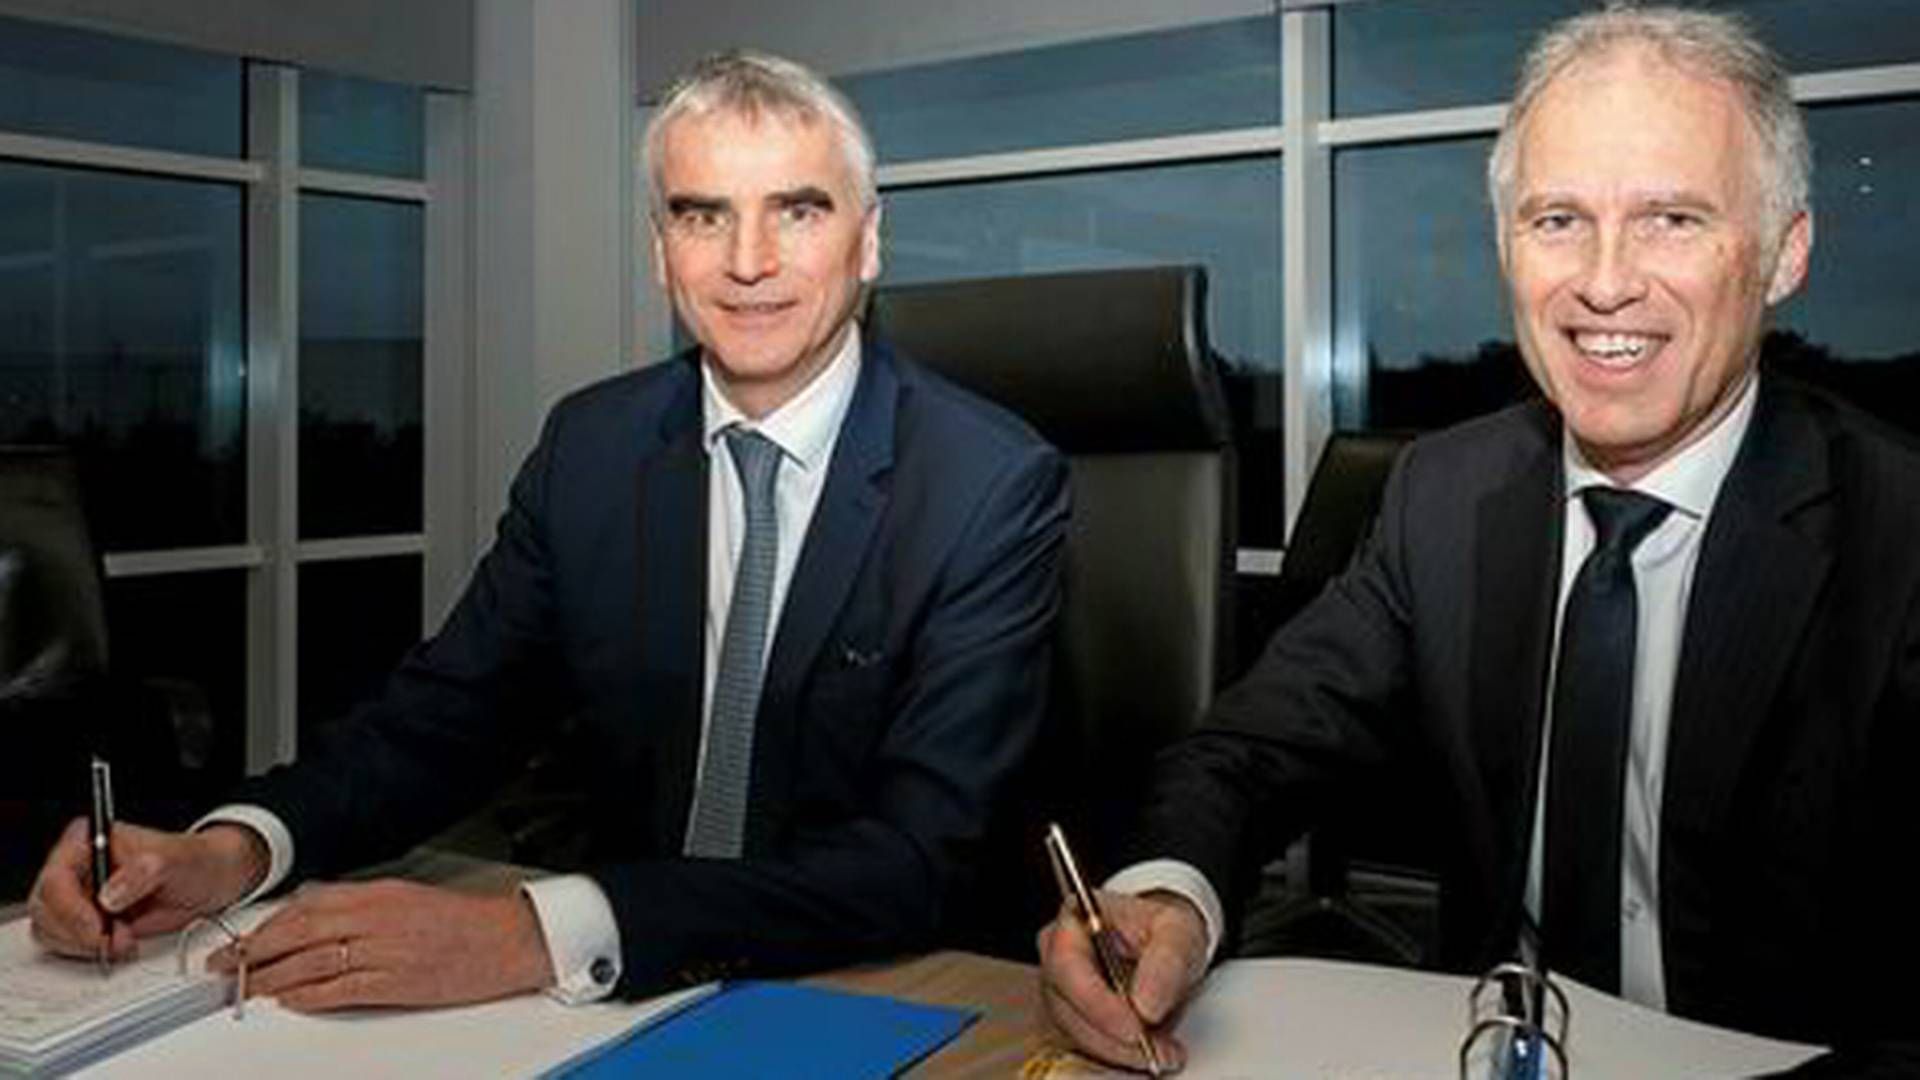 On Thursday, Total E&P UK Managing Director Jean-Luc Guiziou (left) and Ponticelli Executive VP Thierry Le Gangneux signed a new long-term collaboration agreement. | Photo: PBS